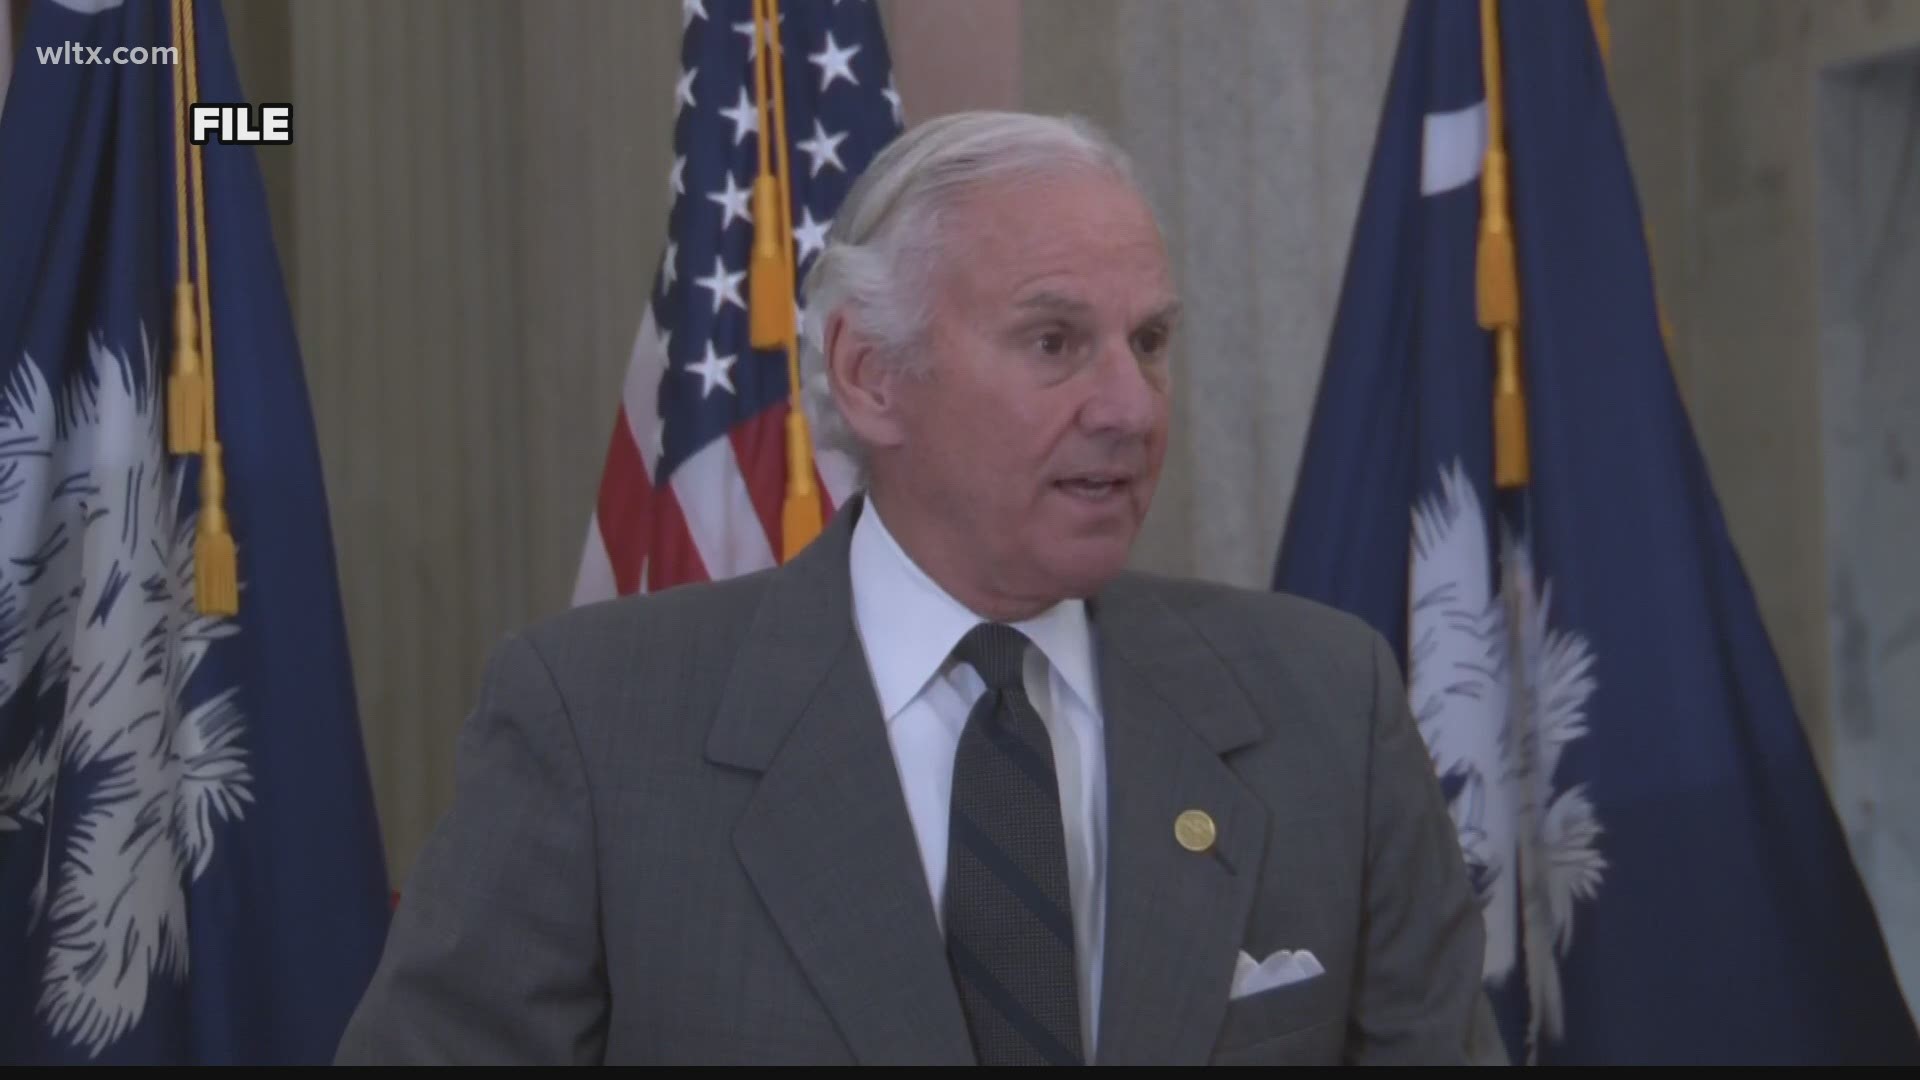 South Carolina governor urges others to be extra careful; residents talk about holiday plans